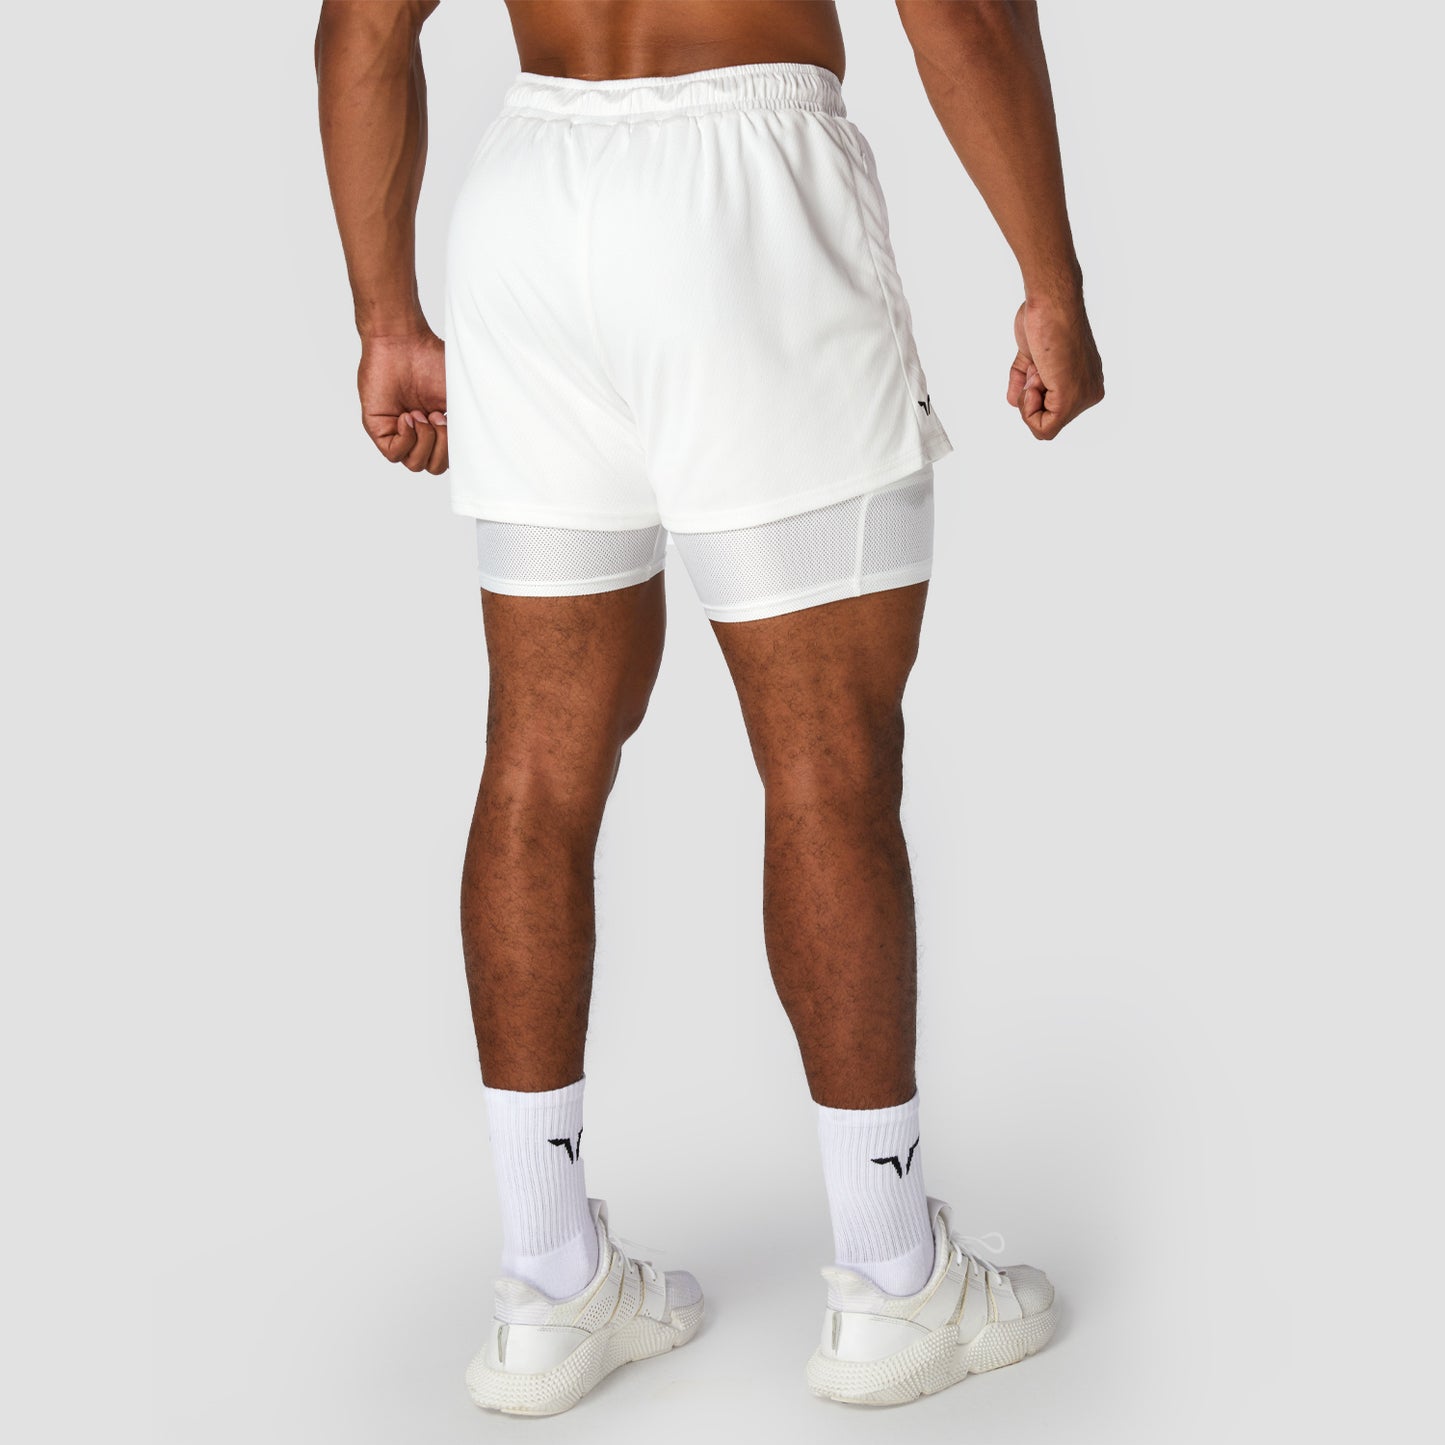 squatwolf-gym-wear-hybrid-performance-2-in-1-shorts-white-workout-shorts-for-men